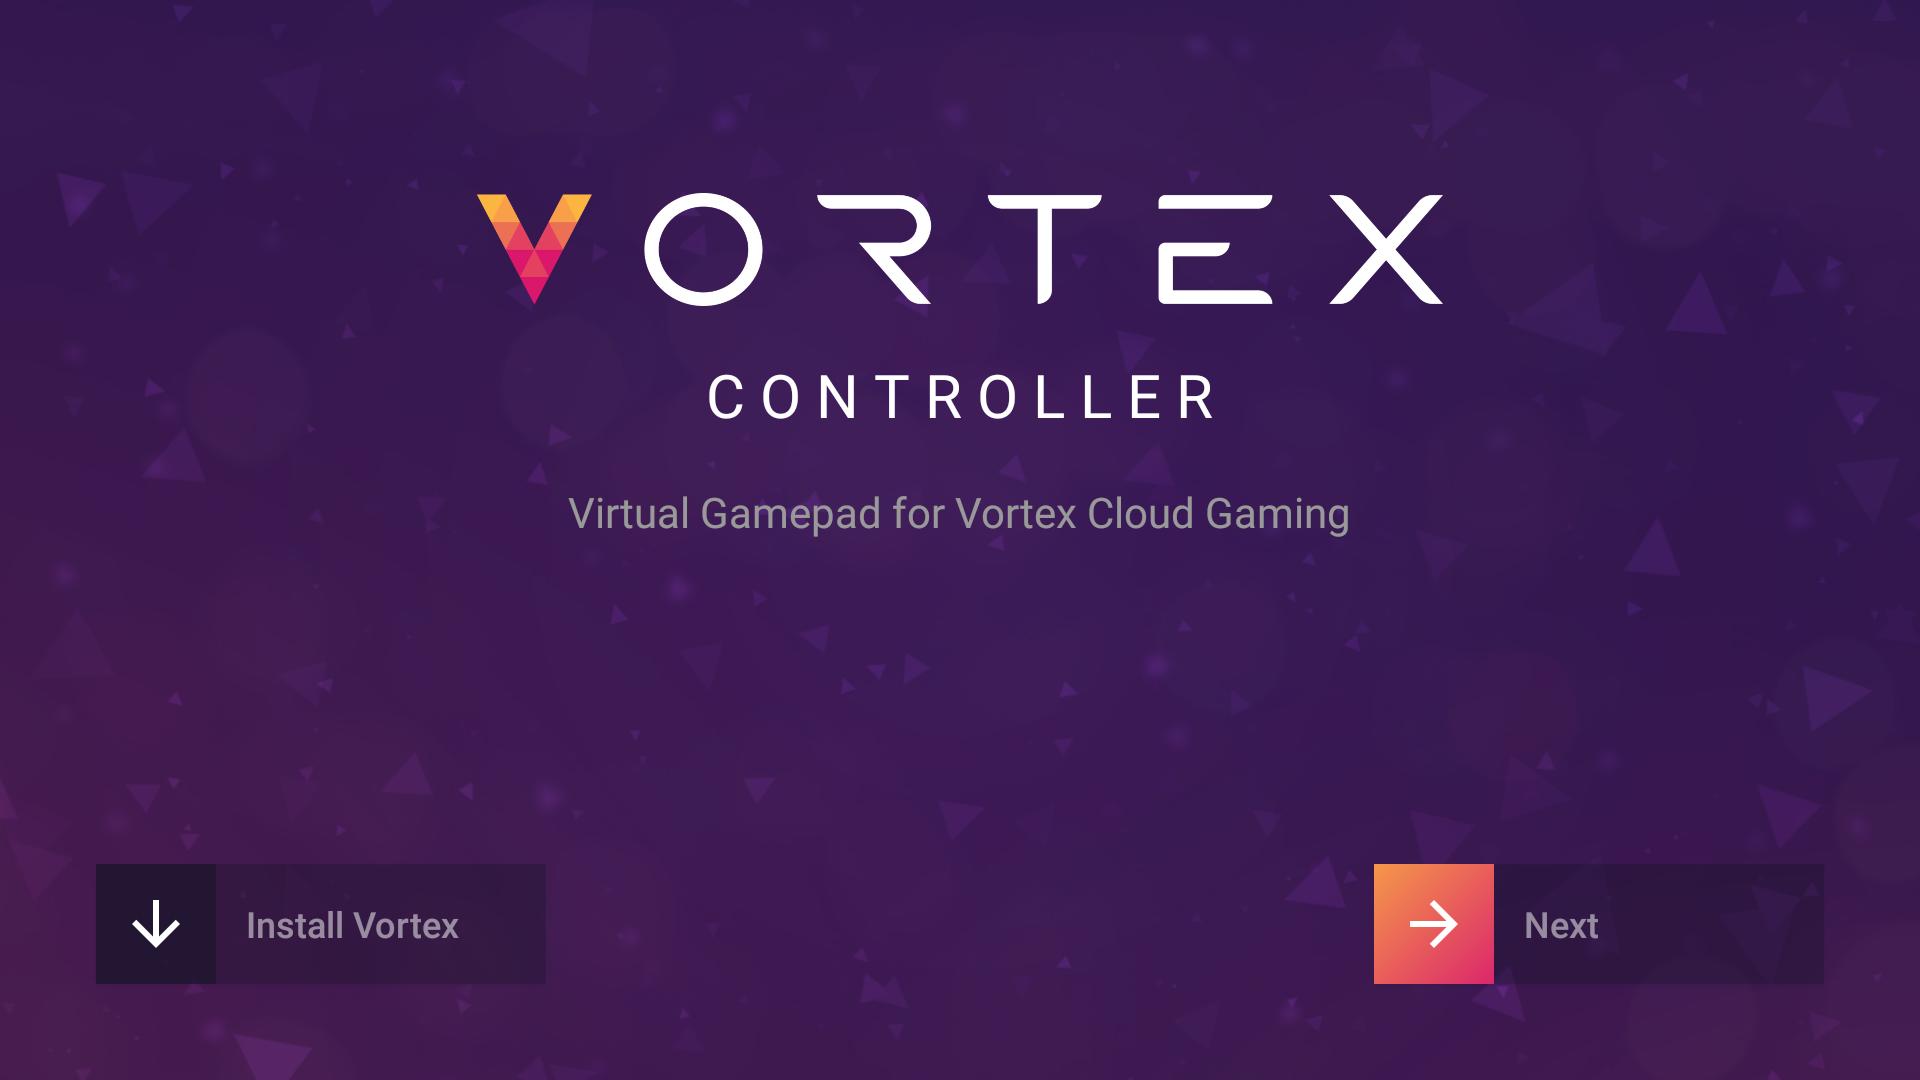 Vortex Controller for Android - APK Download